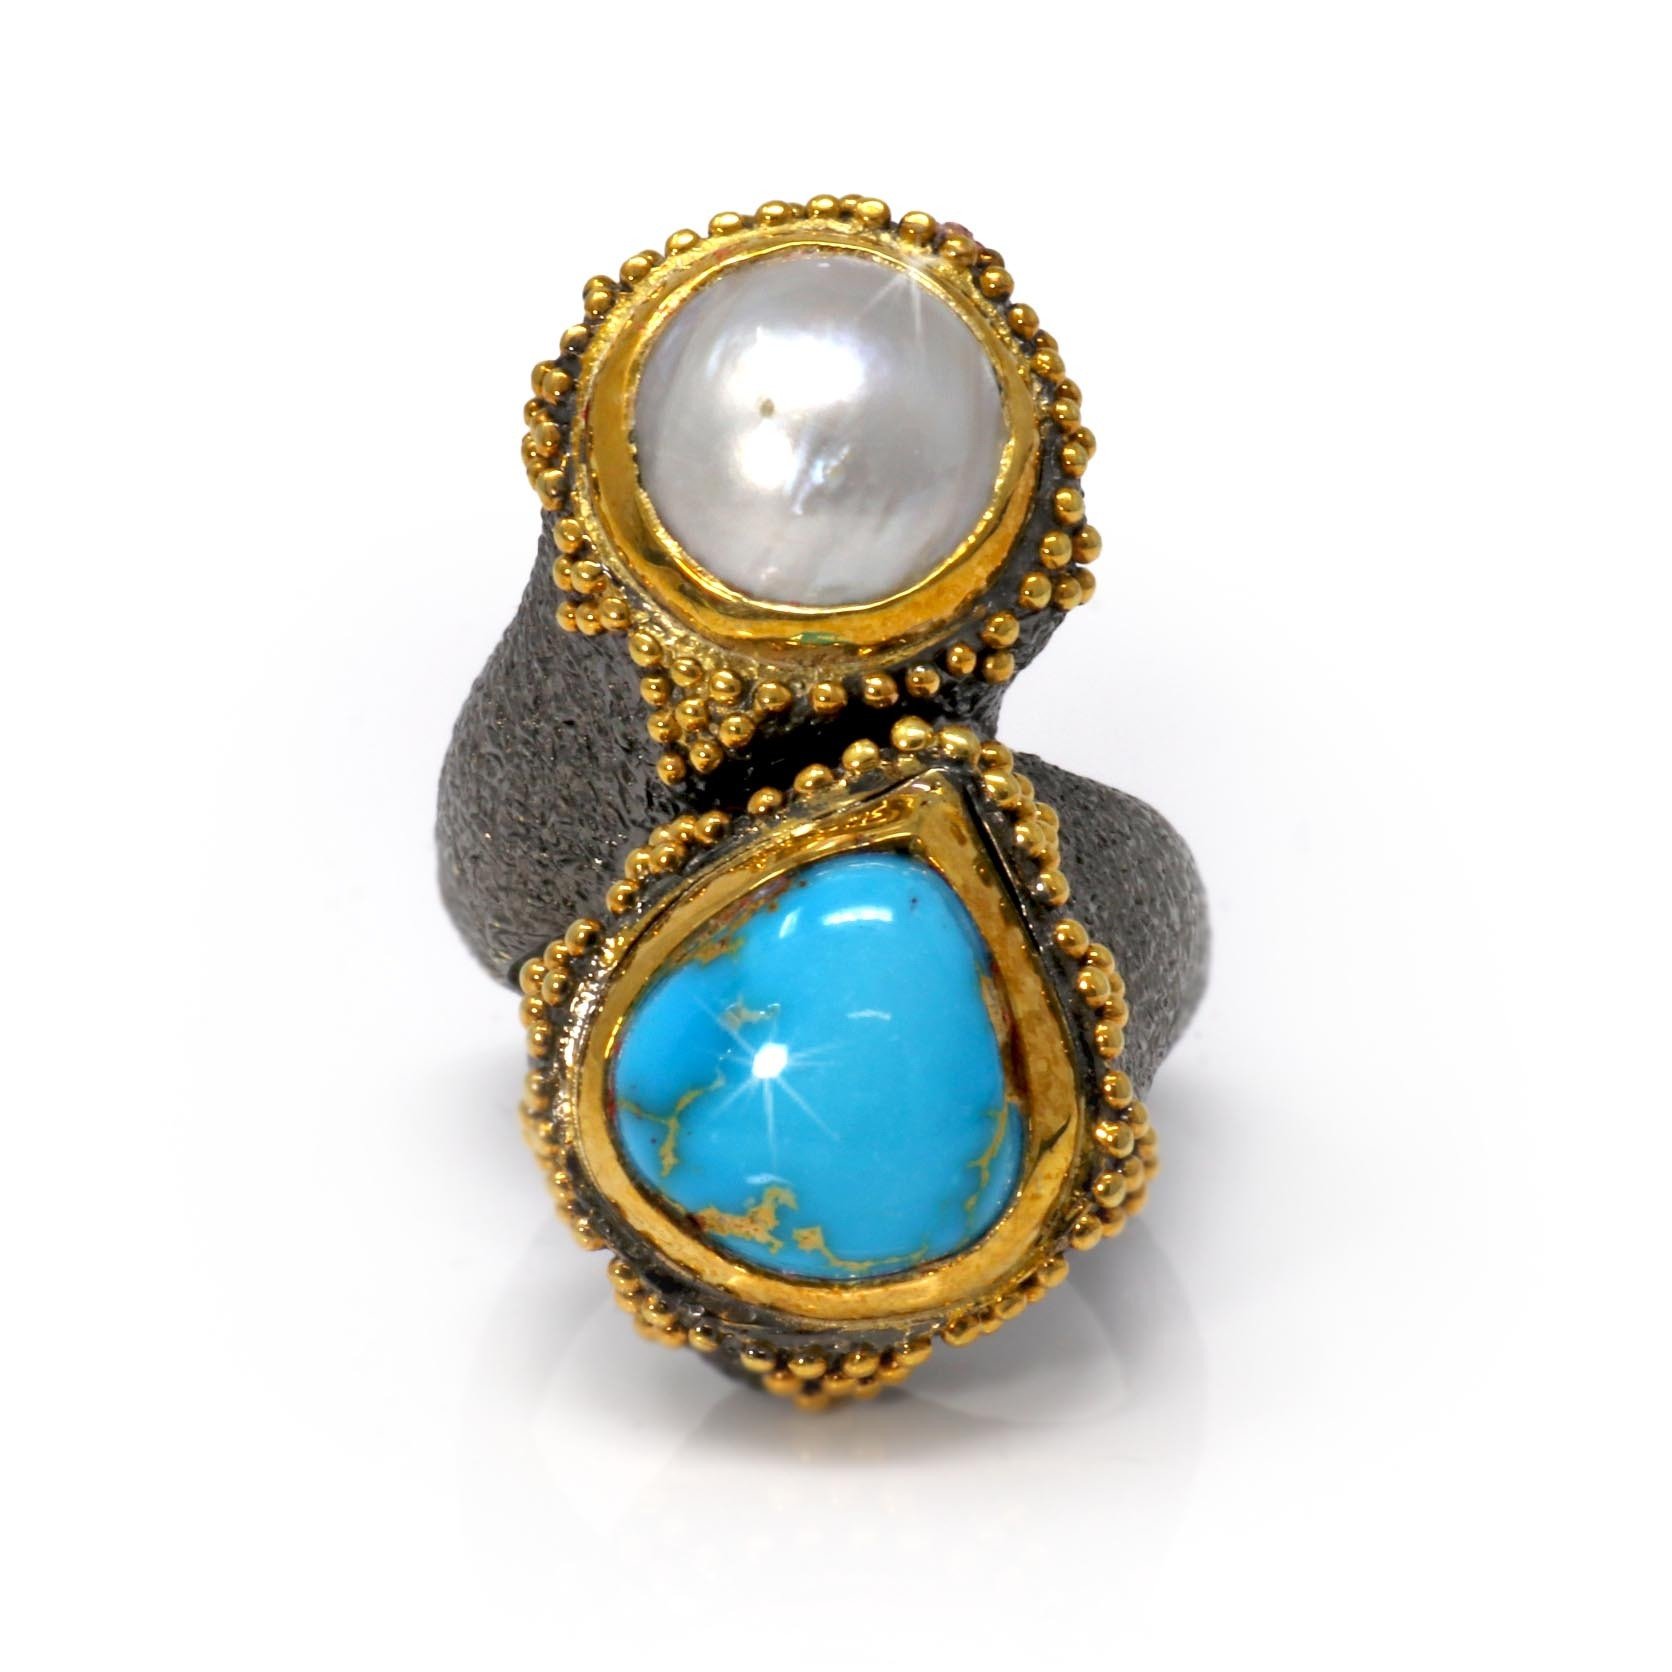 New Mexico Turquoise Ring Size 7.5 - Stacked Voluptuous Pear Cabochon & Pearl With Gold Vermeil Bezels & Beading On Stamped Oxidized Sterling Silver Band